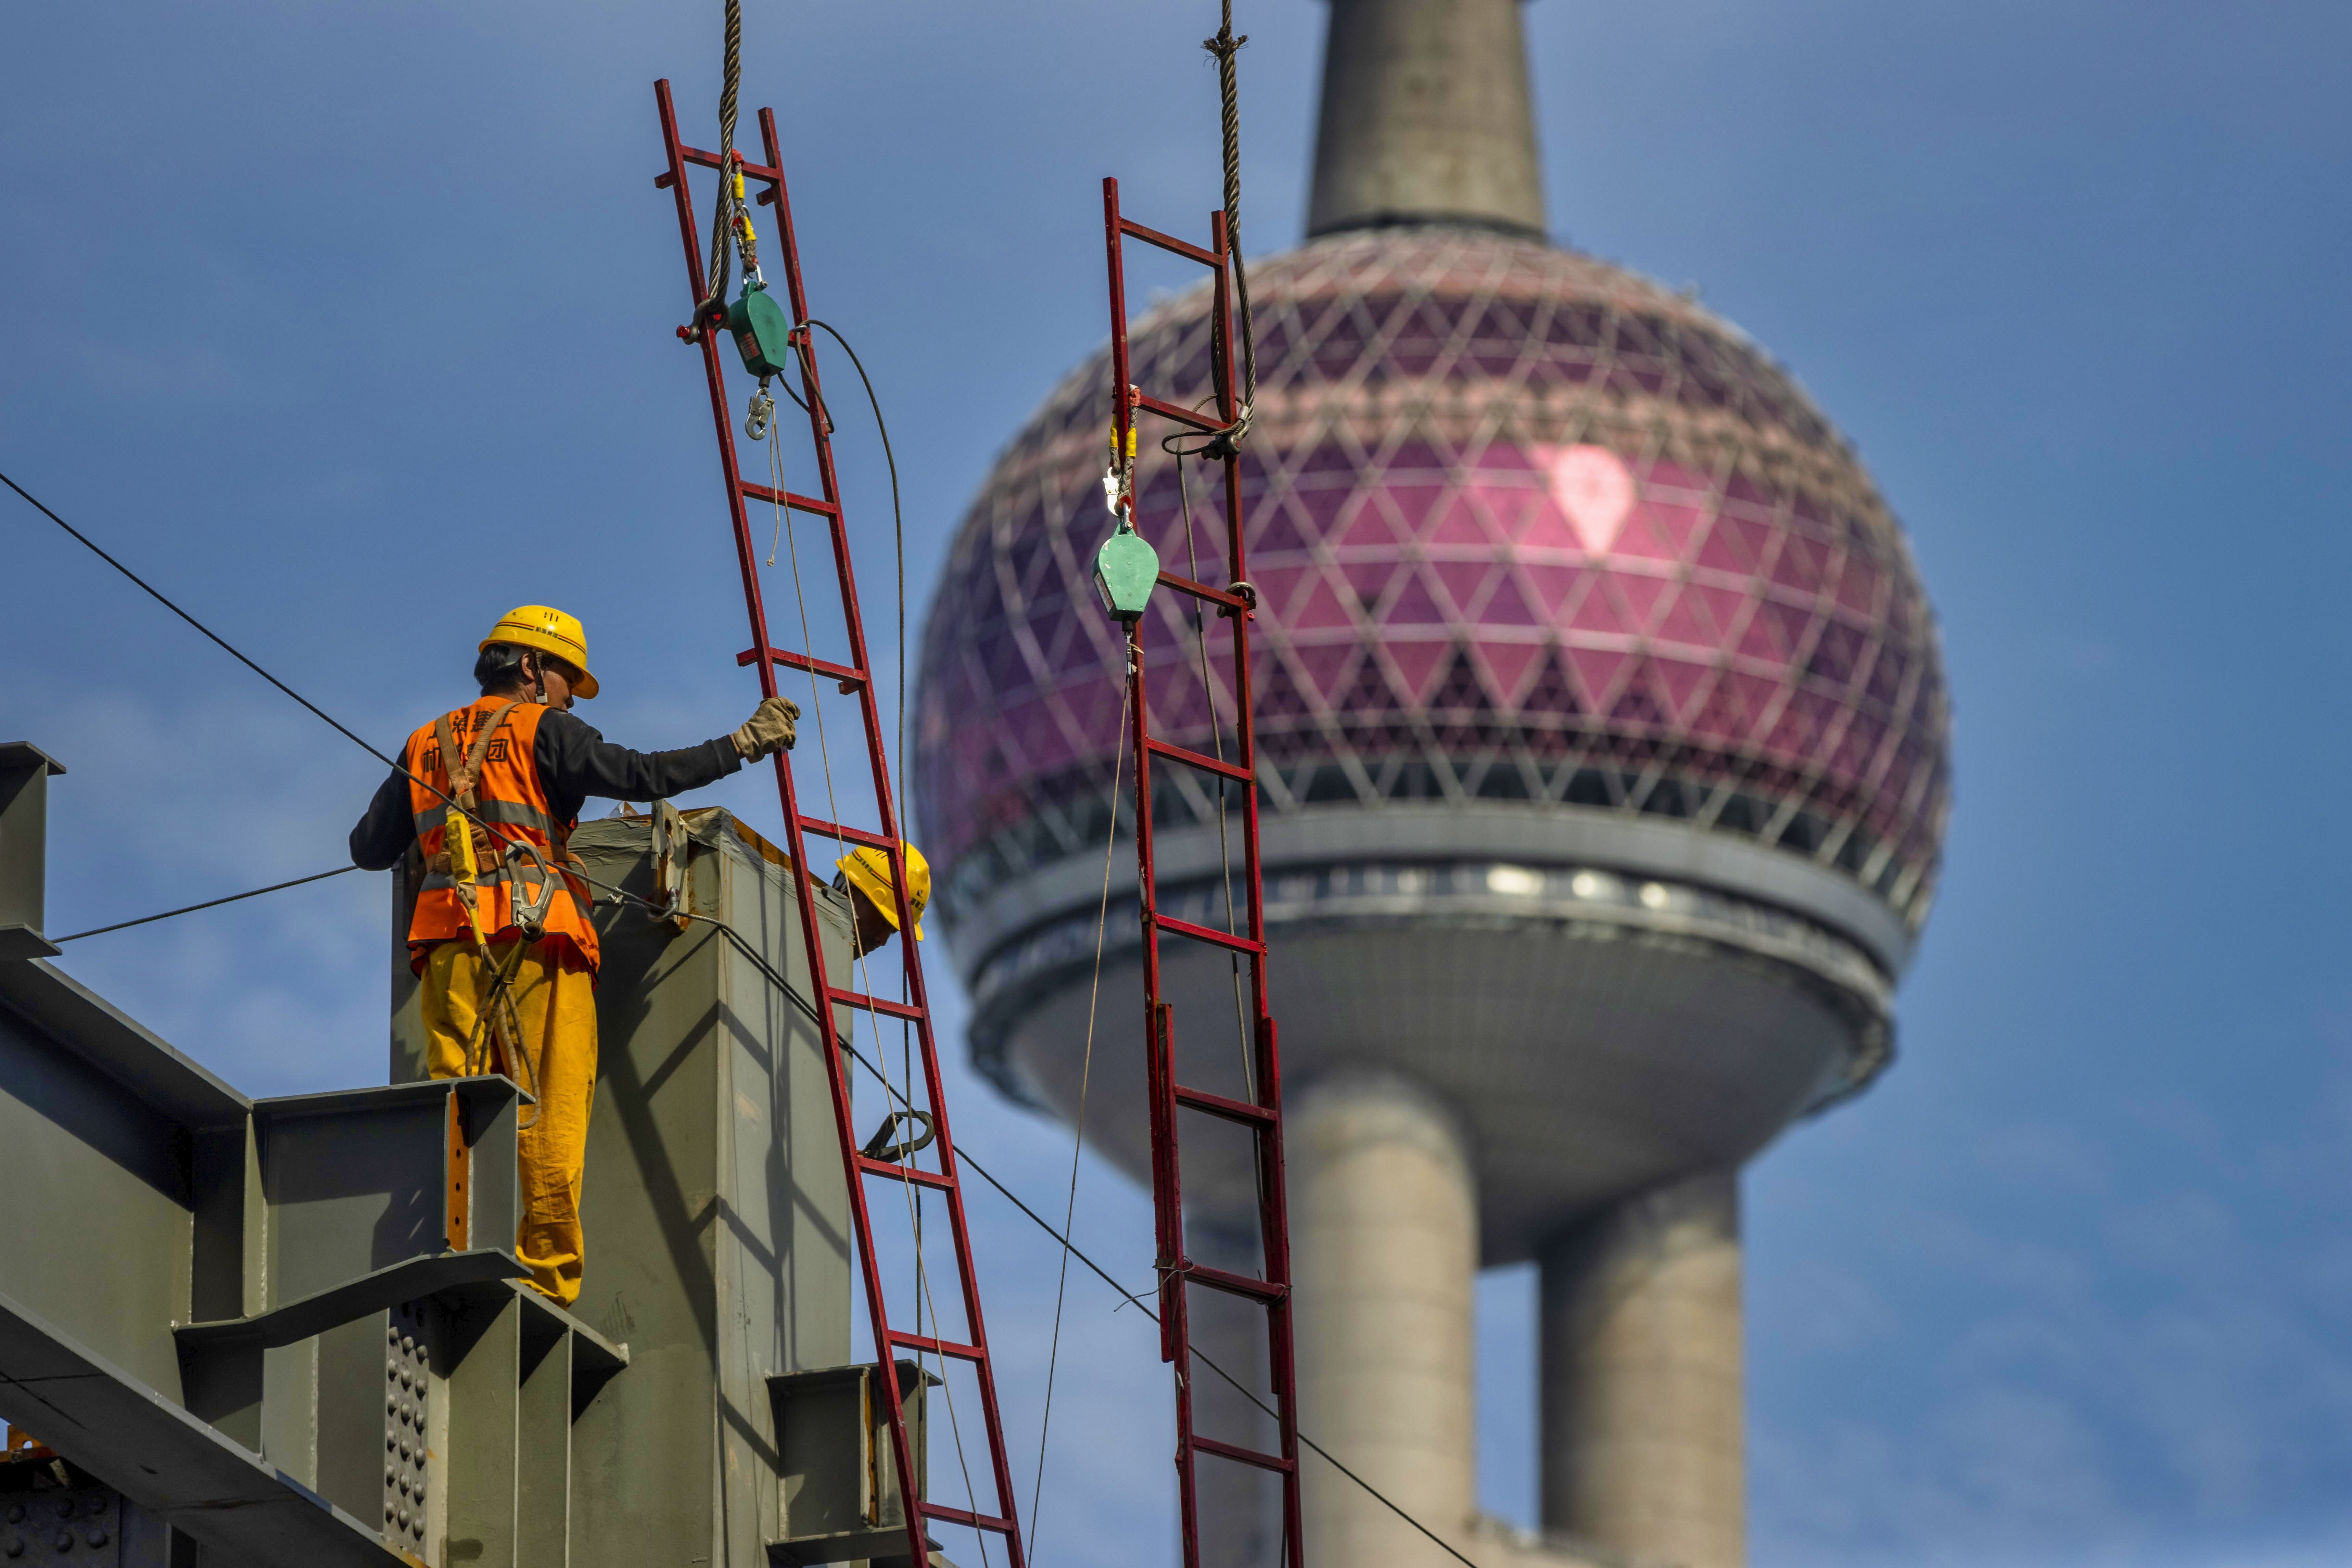 A new report by the Centre for Global Development finds that China is both a growing donor to global organisations while remaining a major borrower from development banks. Photo: EPA-EFE